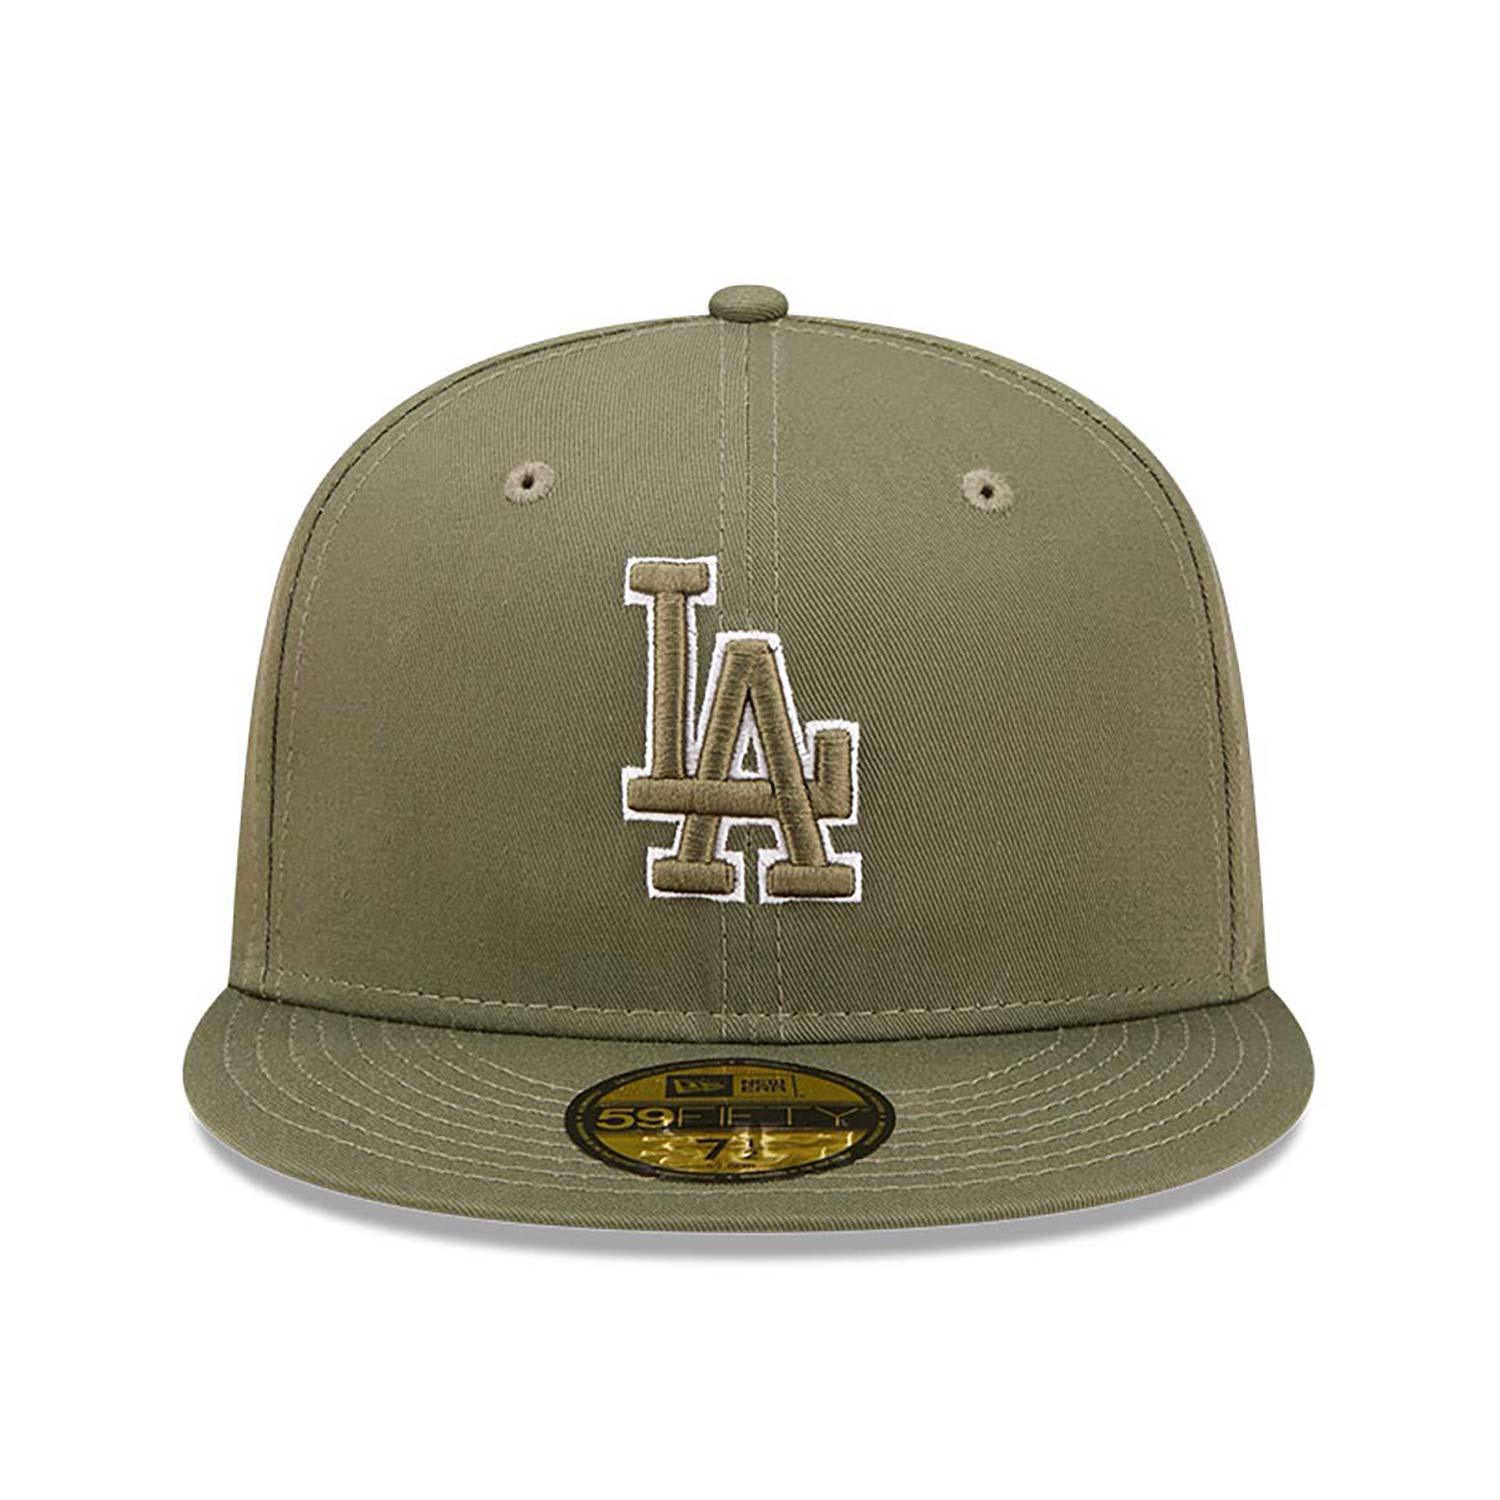 NEW ERA 59FIFTY MLB LOS ANGELES DODGERS TEAM OUTLINE OLIVE / OLIVE UV FITTED CAP - FAM